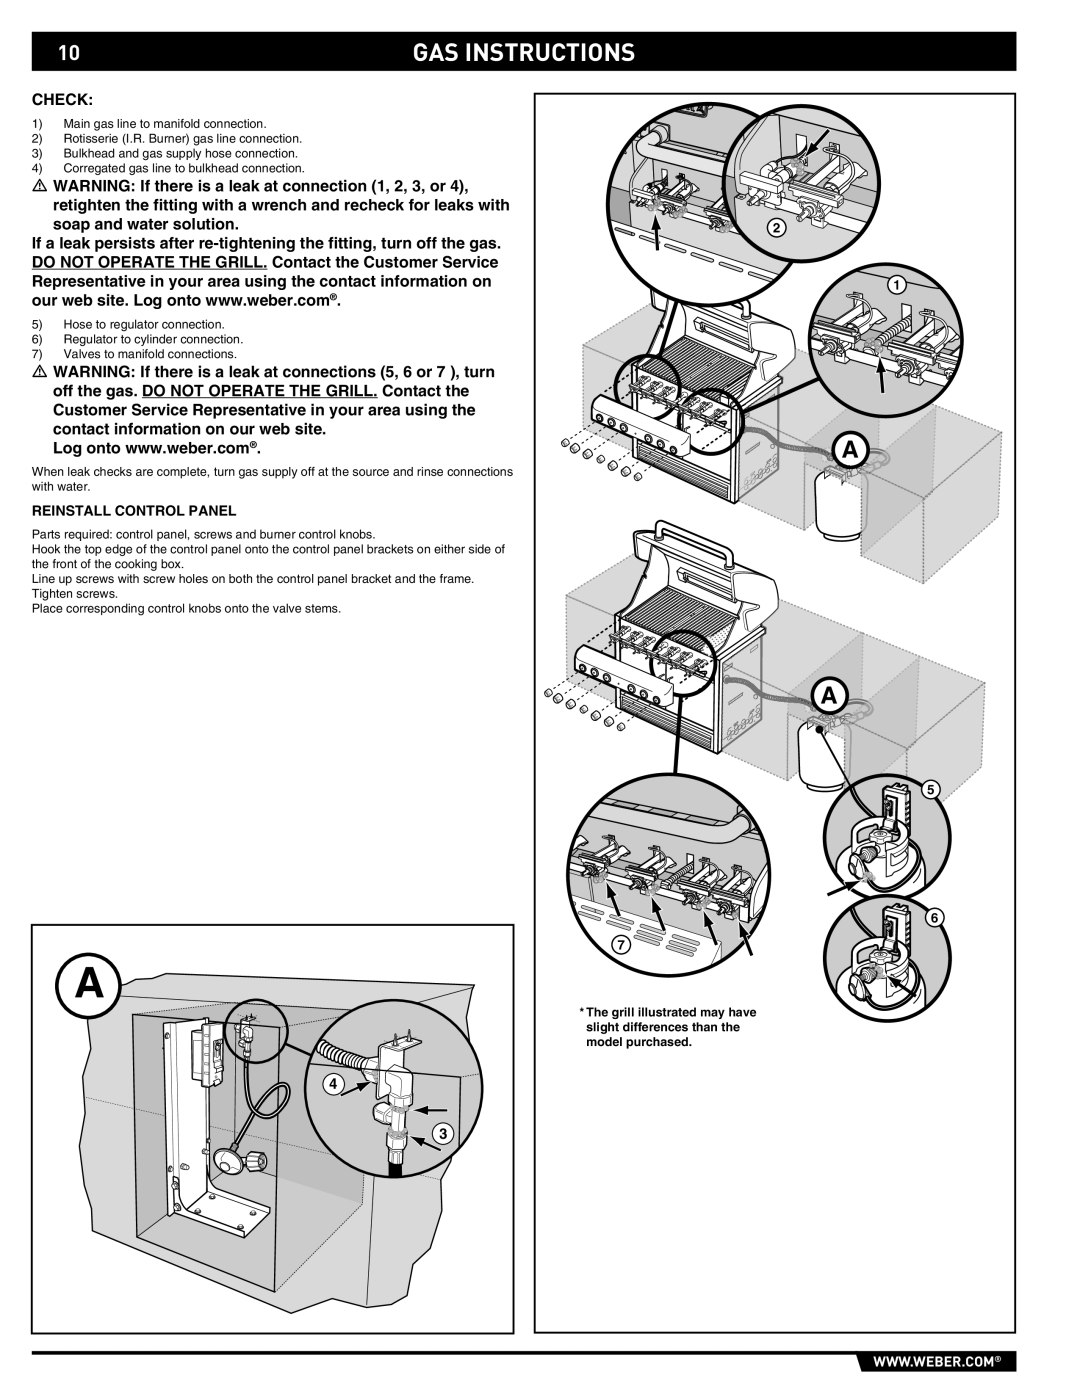 Weber S-460 manual Gas Instructions 